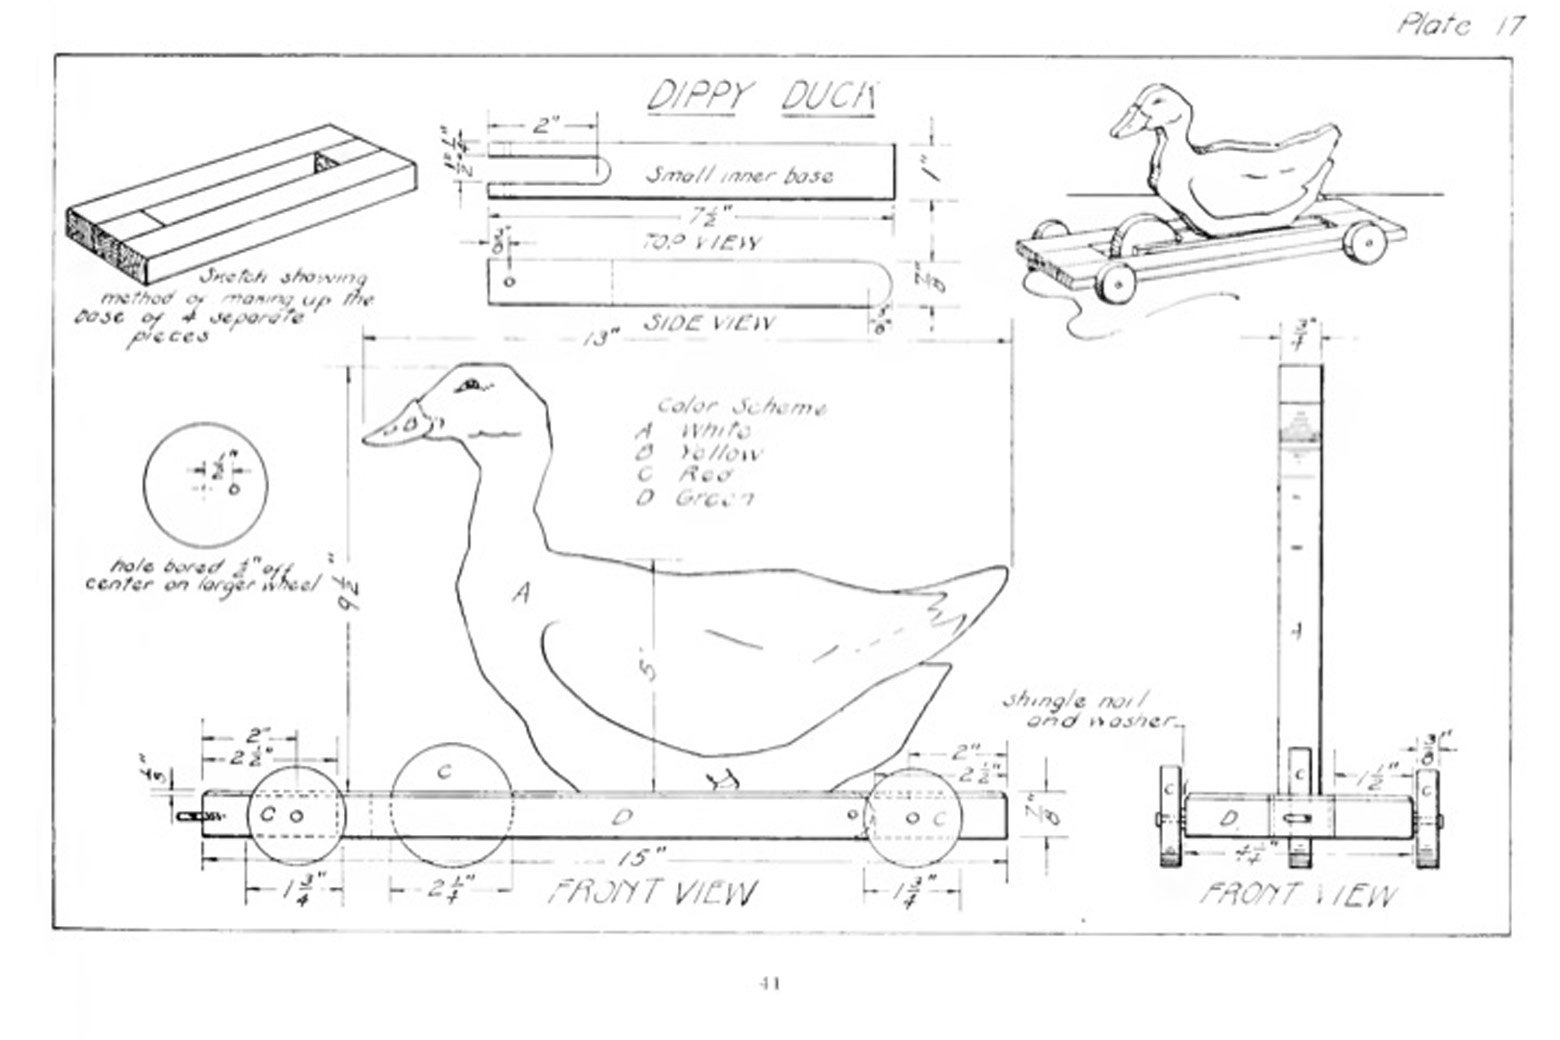 Diagram page of a Dippy Duck schematic from Toy Craft (1922)